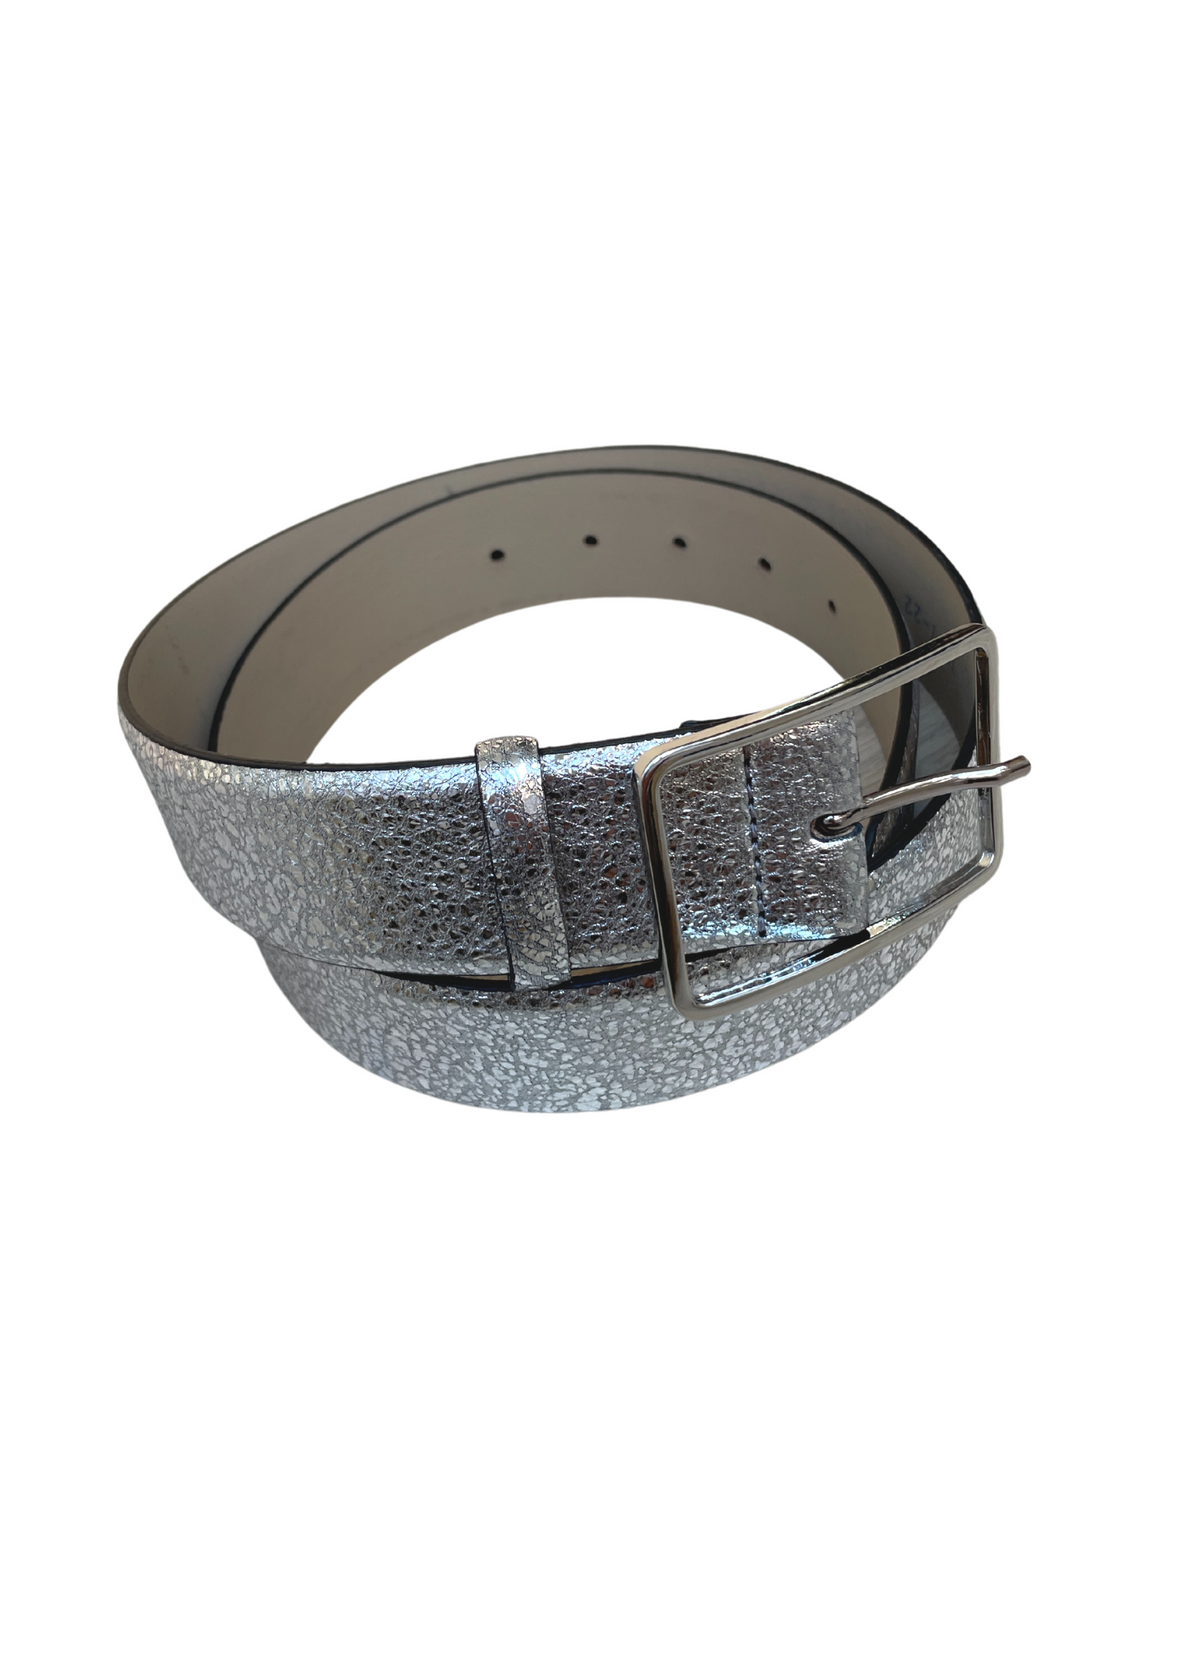  Metallic silver crackle soft leather belt with square silver buckle.